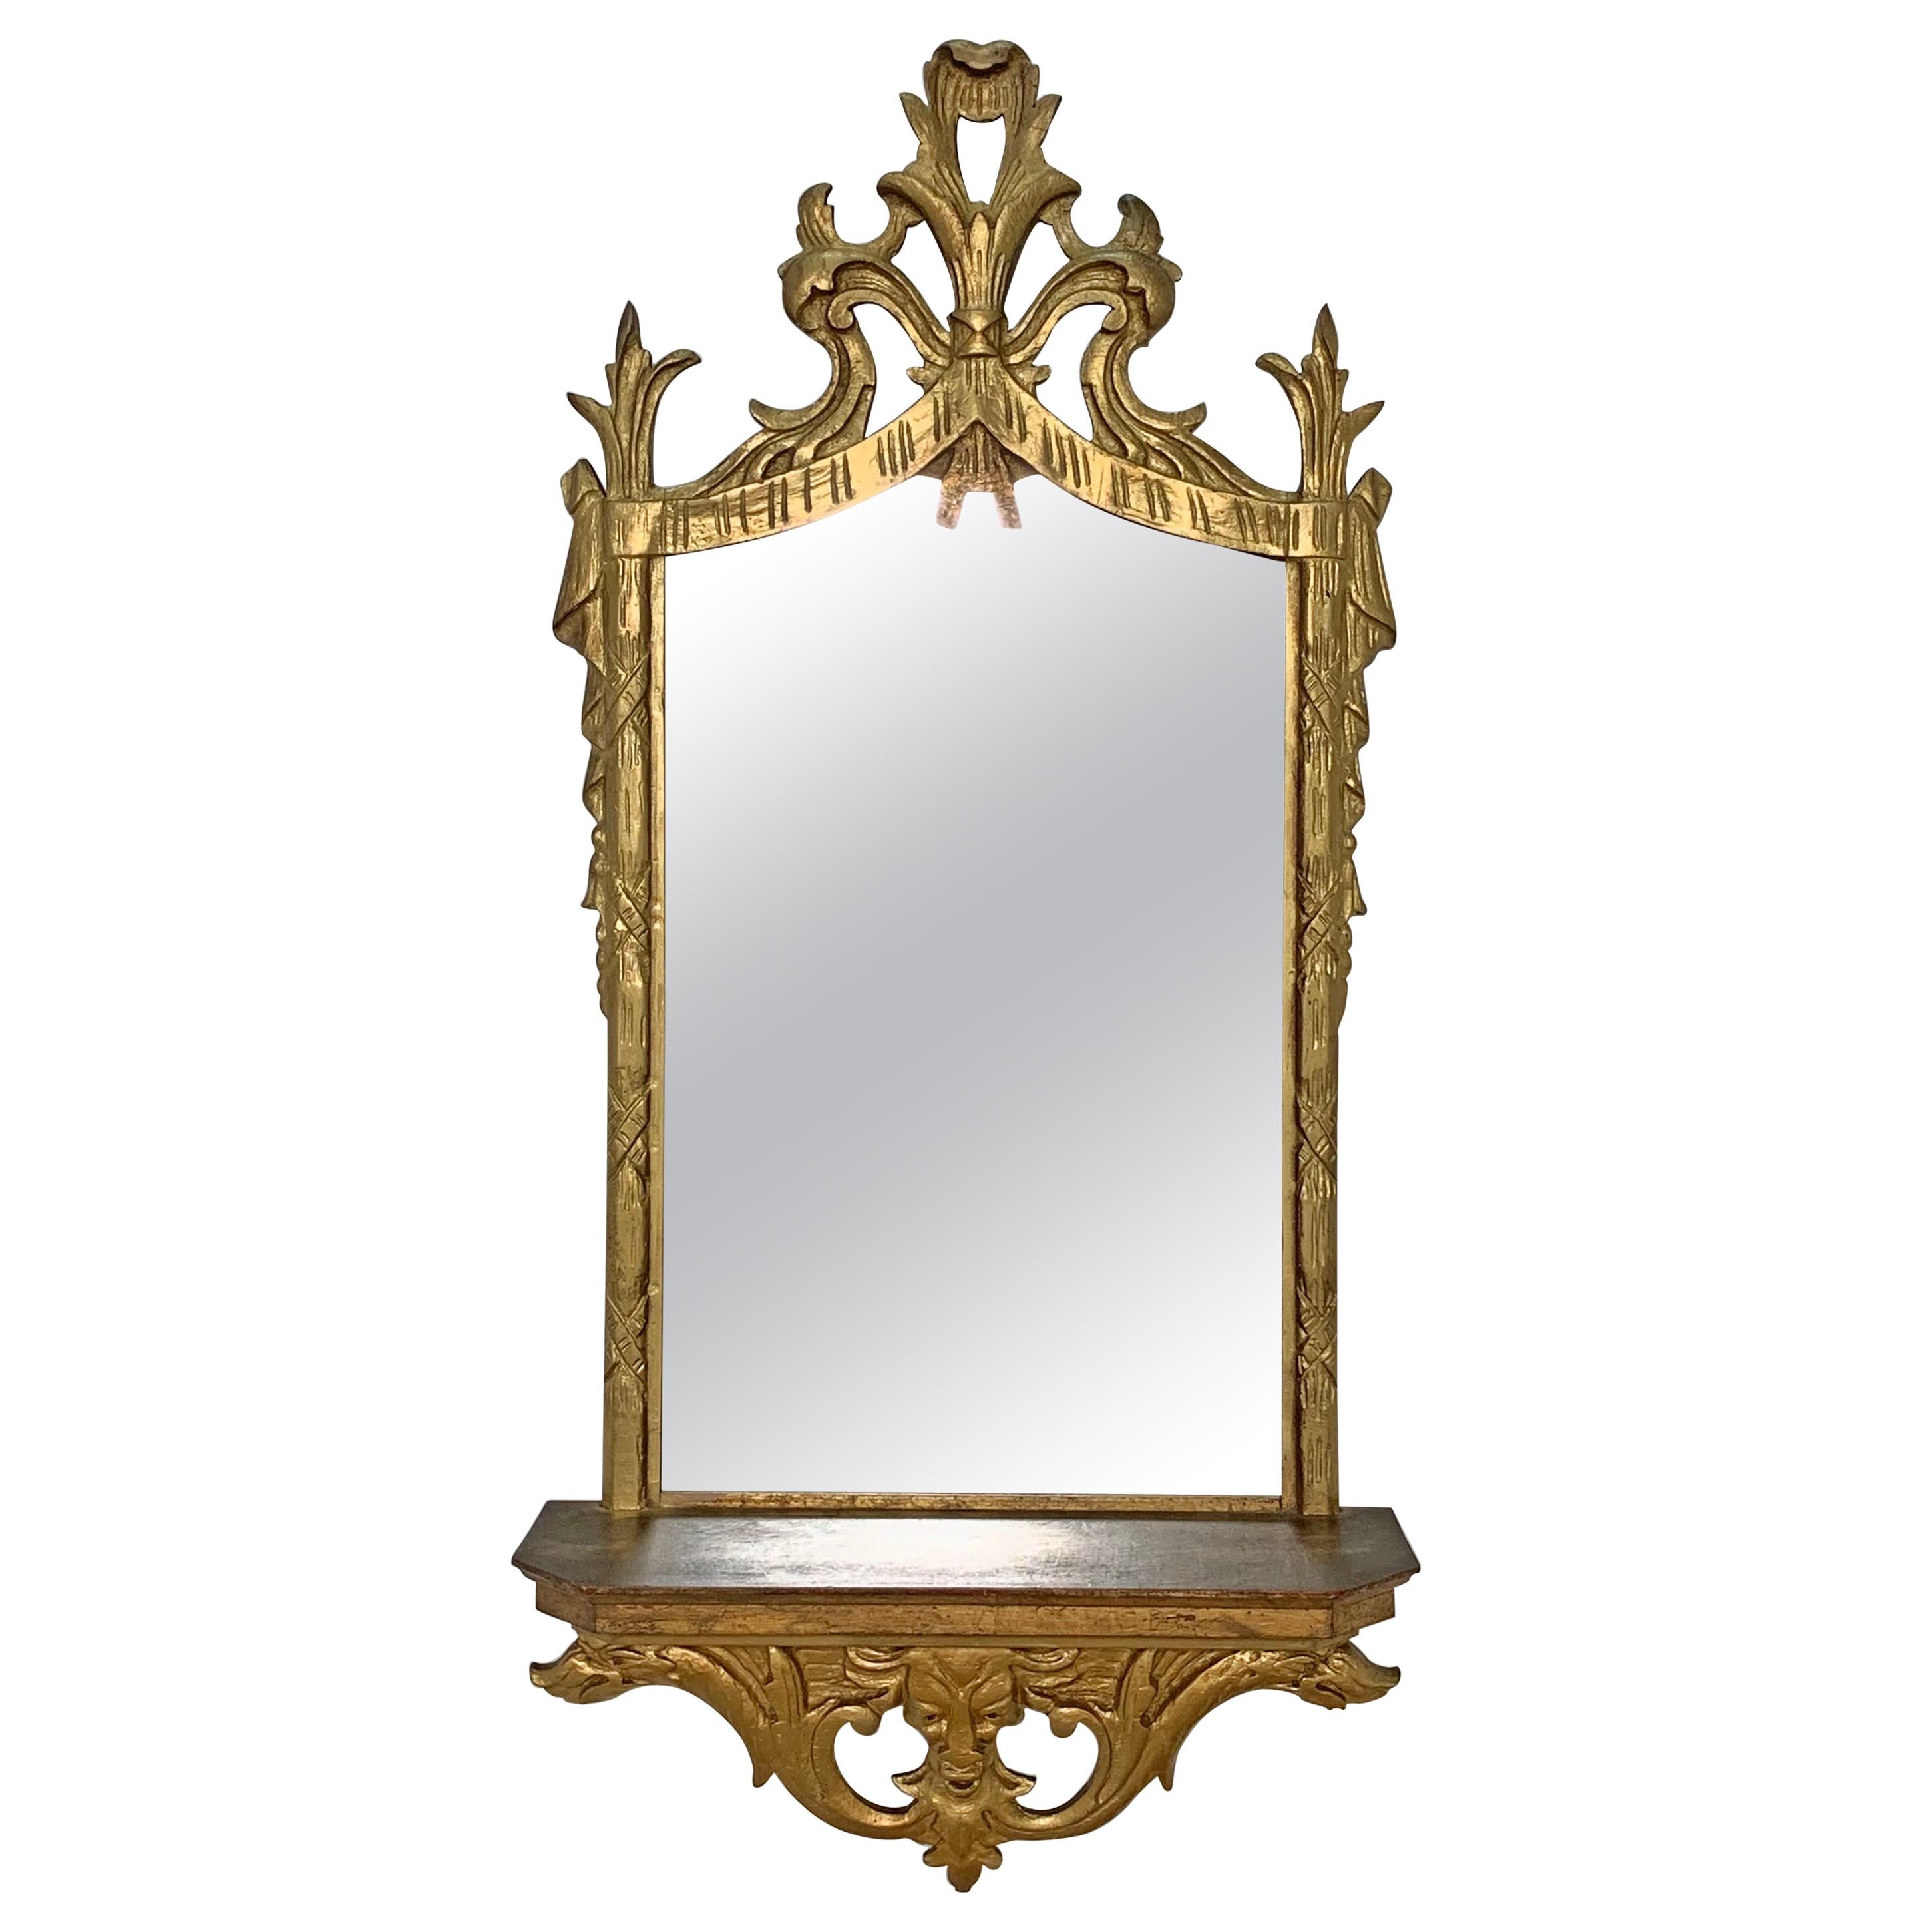 Italian Carved Giltwood Mirror with under Shelf, circa 1950s